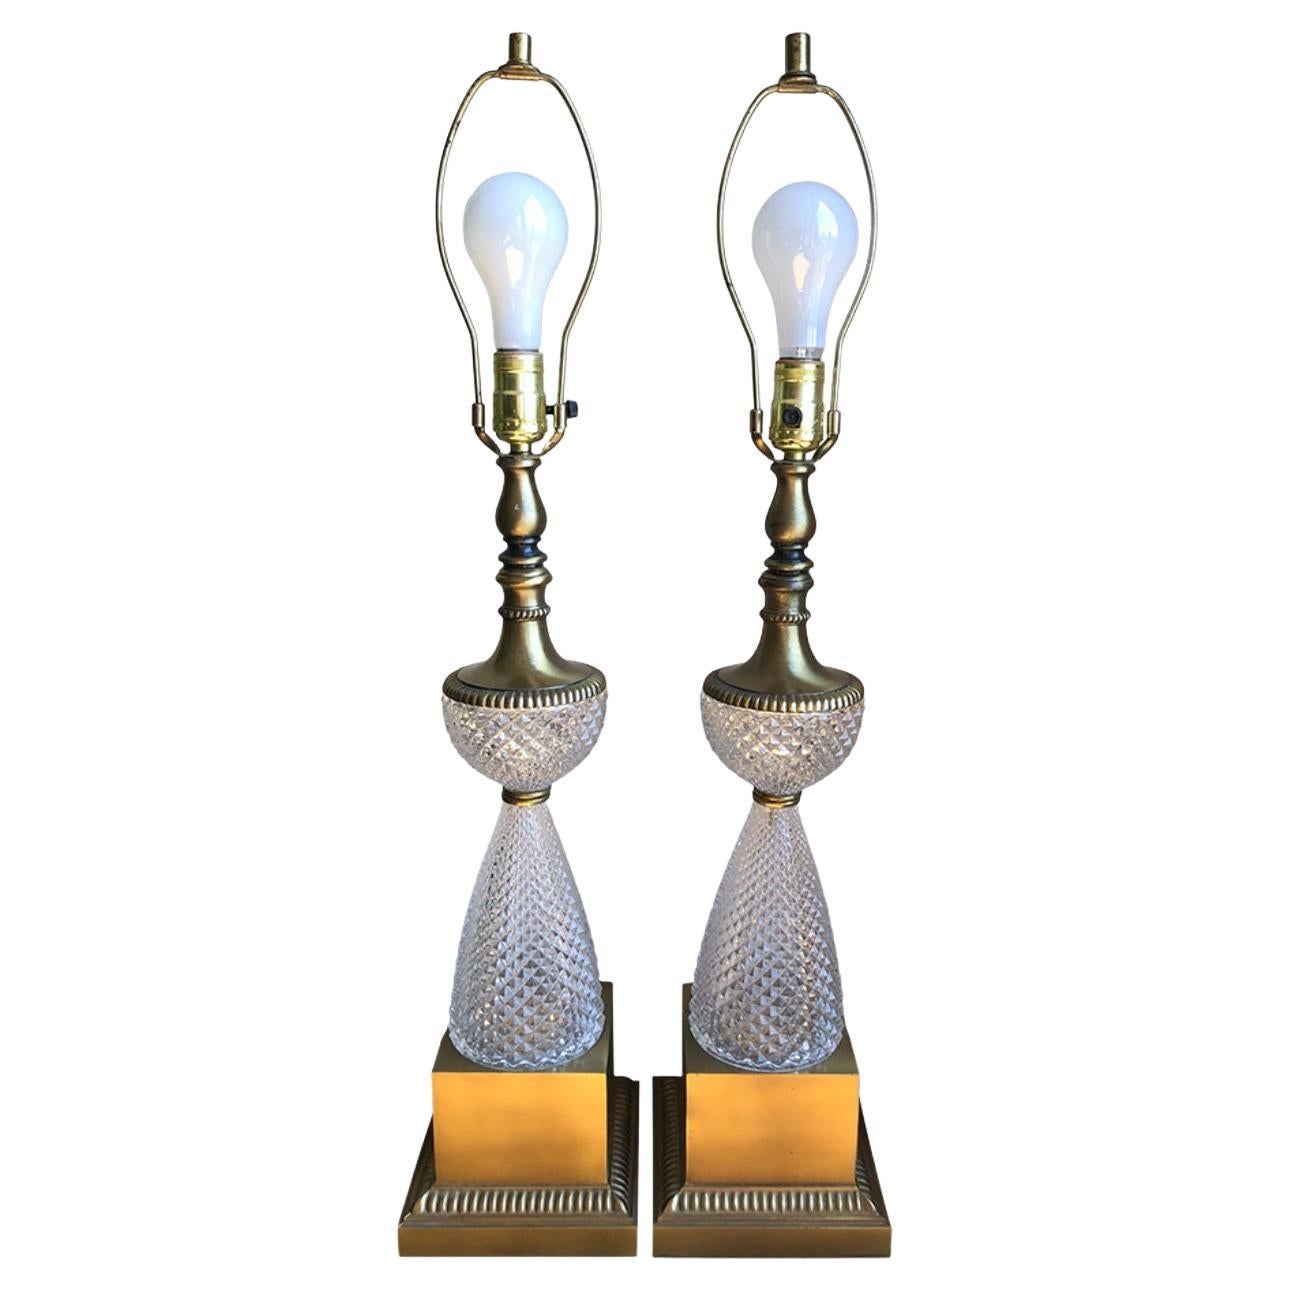 1960s Italian Lead Crystal Brass Lamps, a Pair